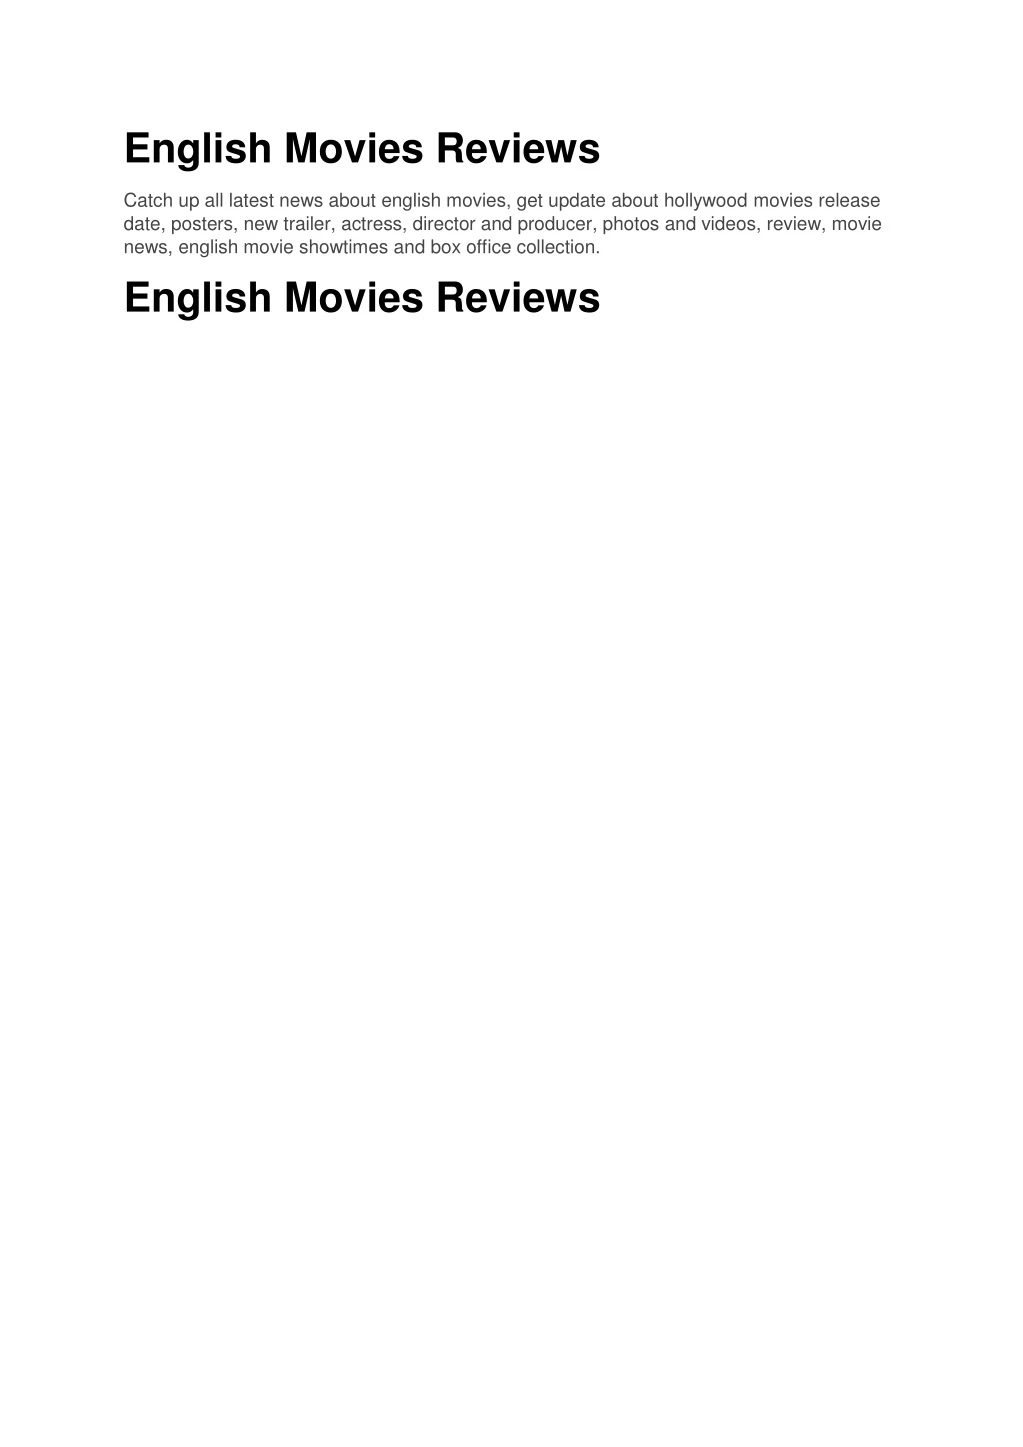 movie review english meaning